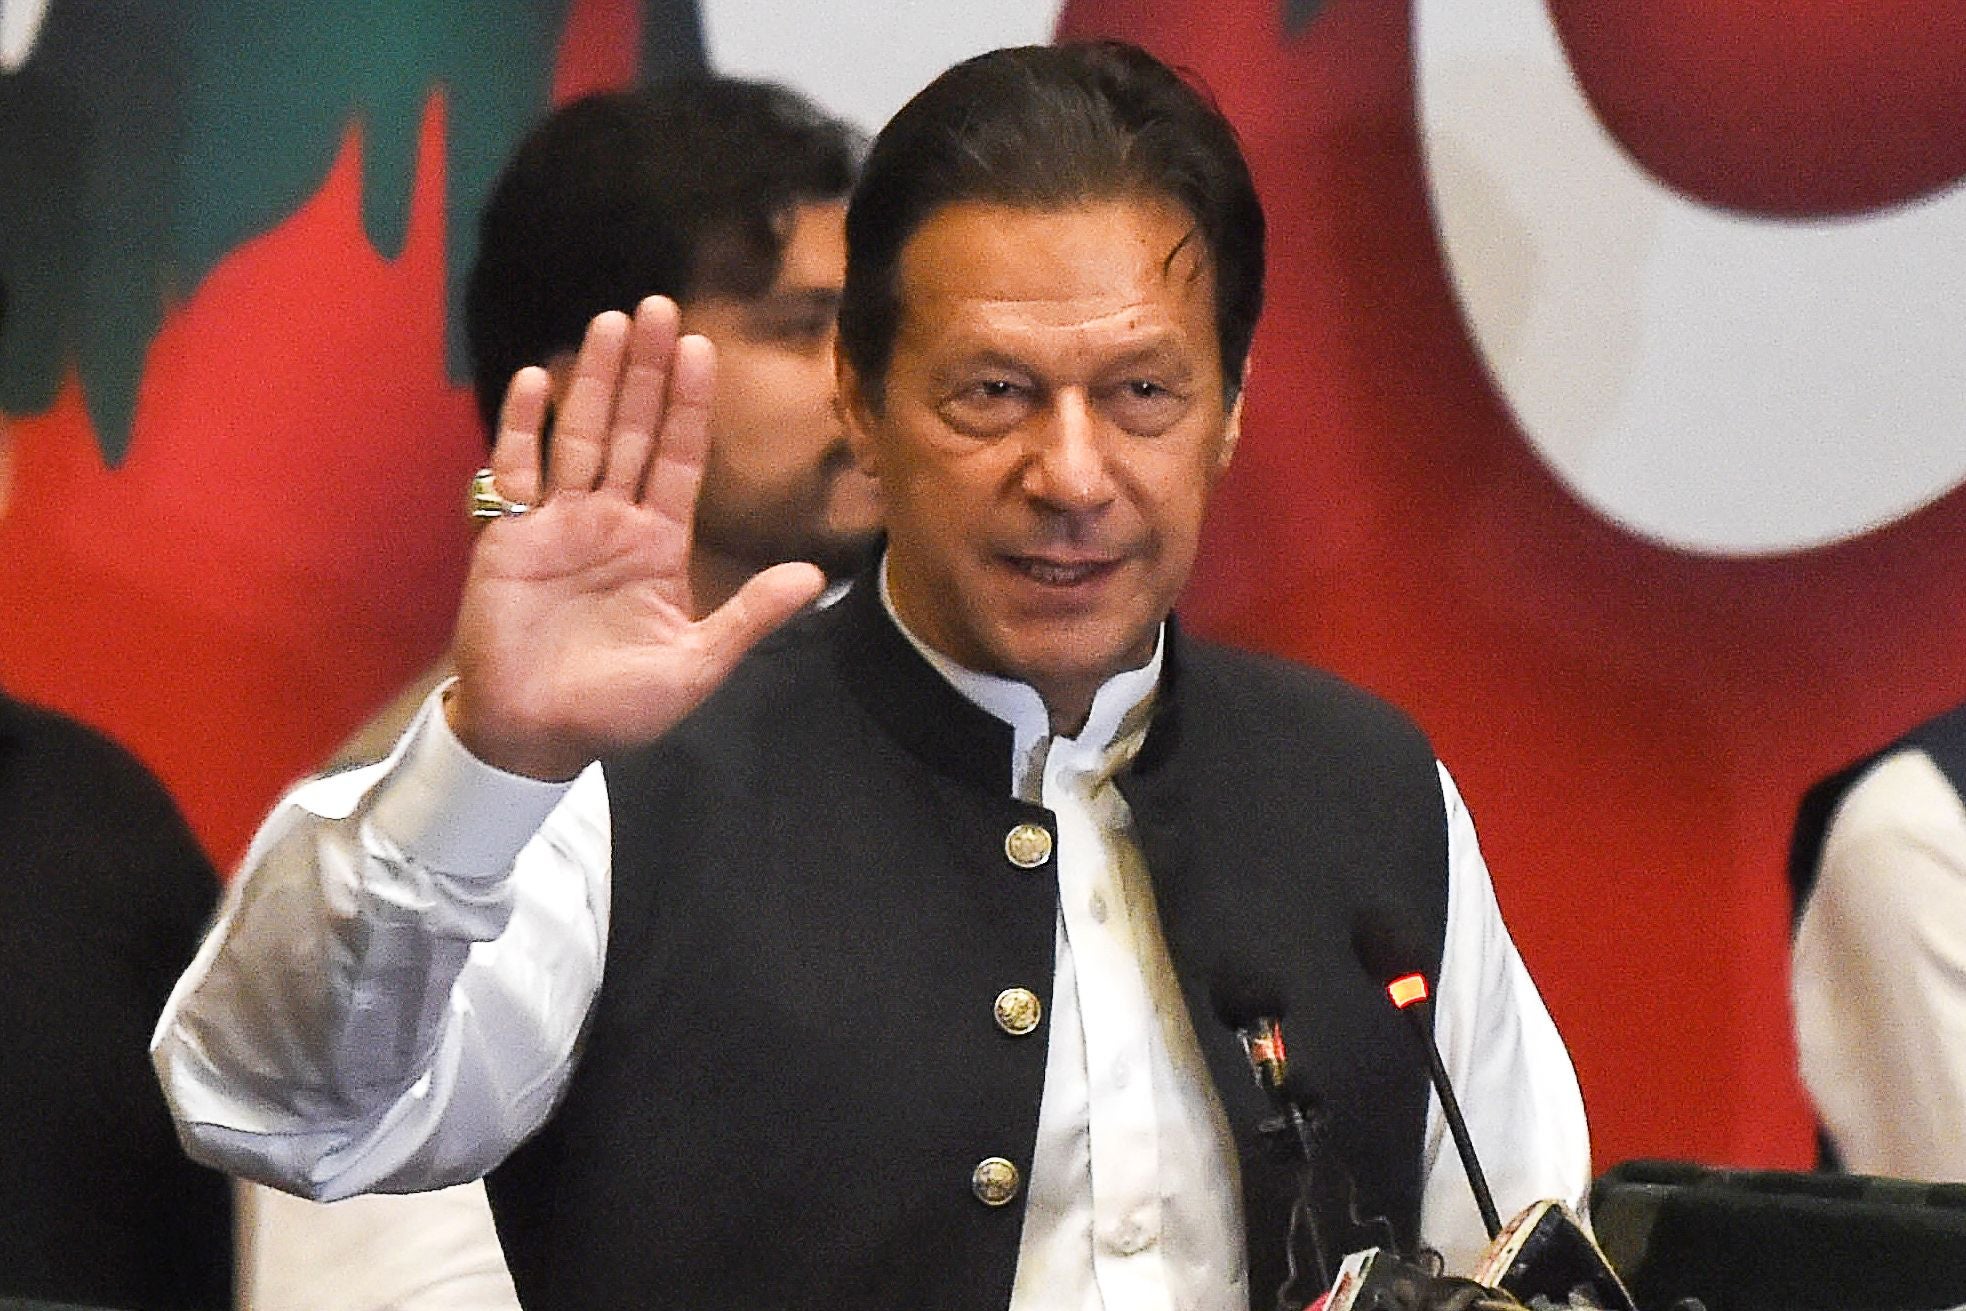 File: A case has been filed against former prime minister Imran Khan after his government was ousted through a no-confidence motion